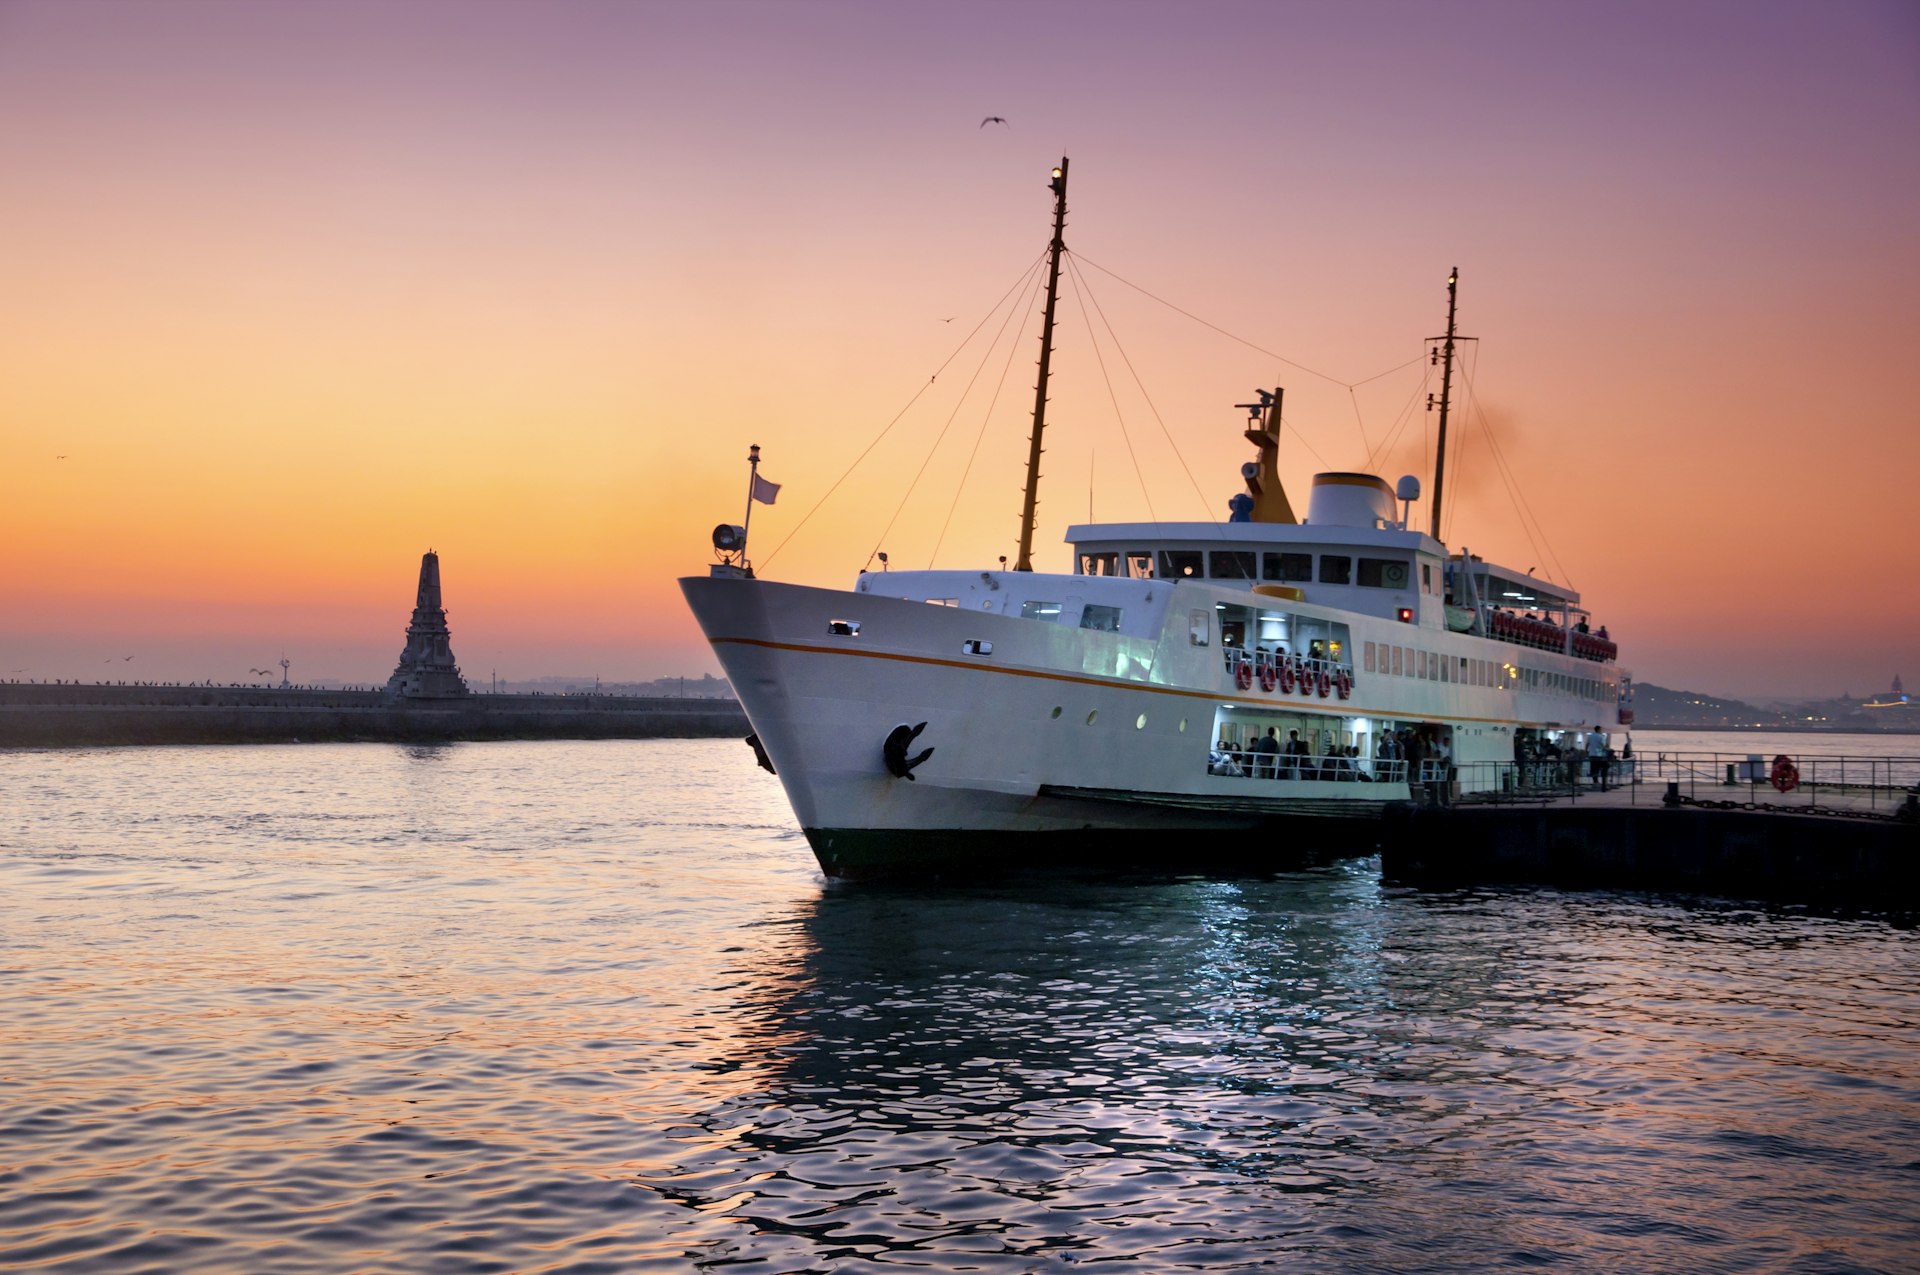 Ferry on the water at sunset in the Bosphorus in Turkey